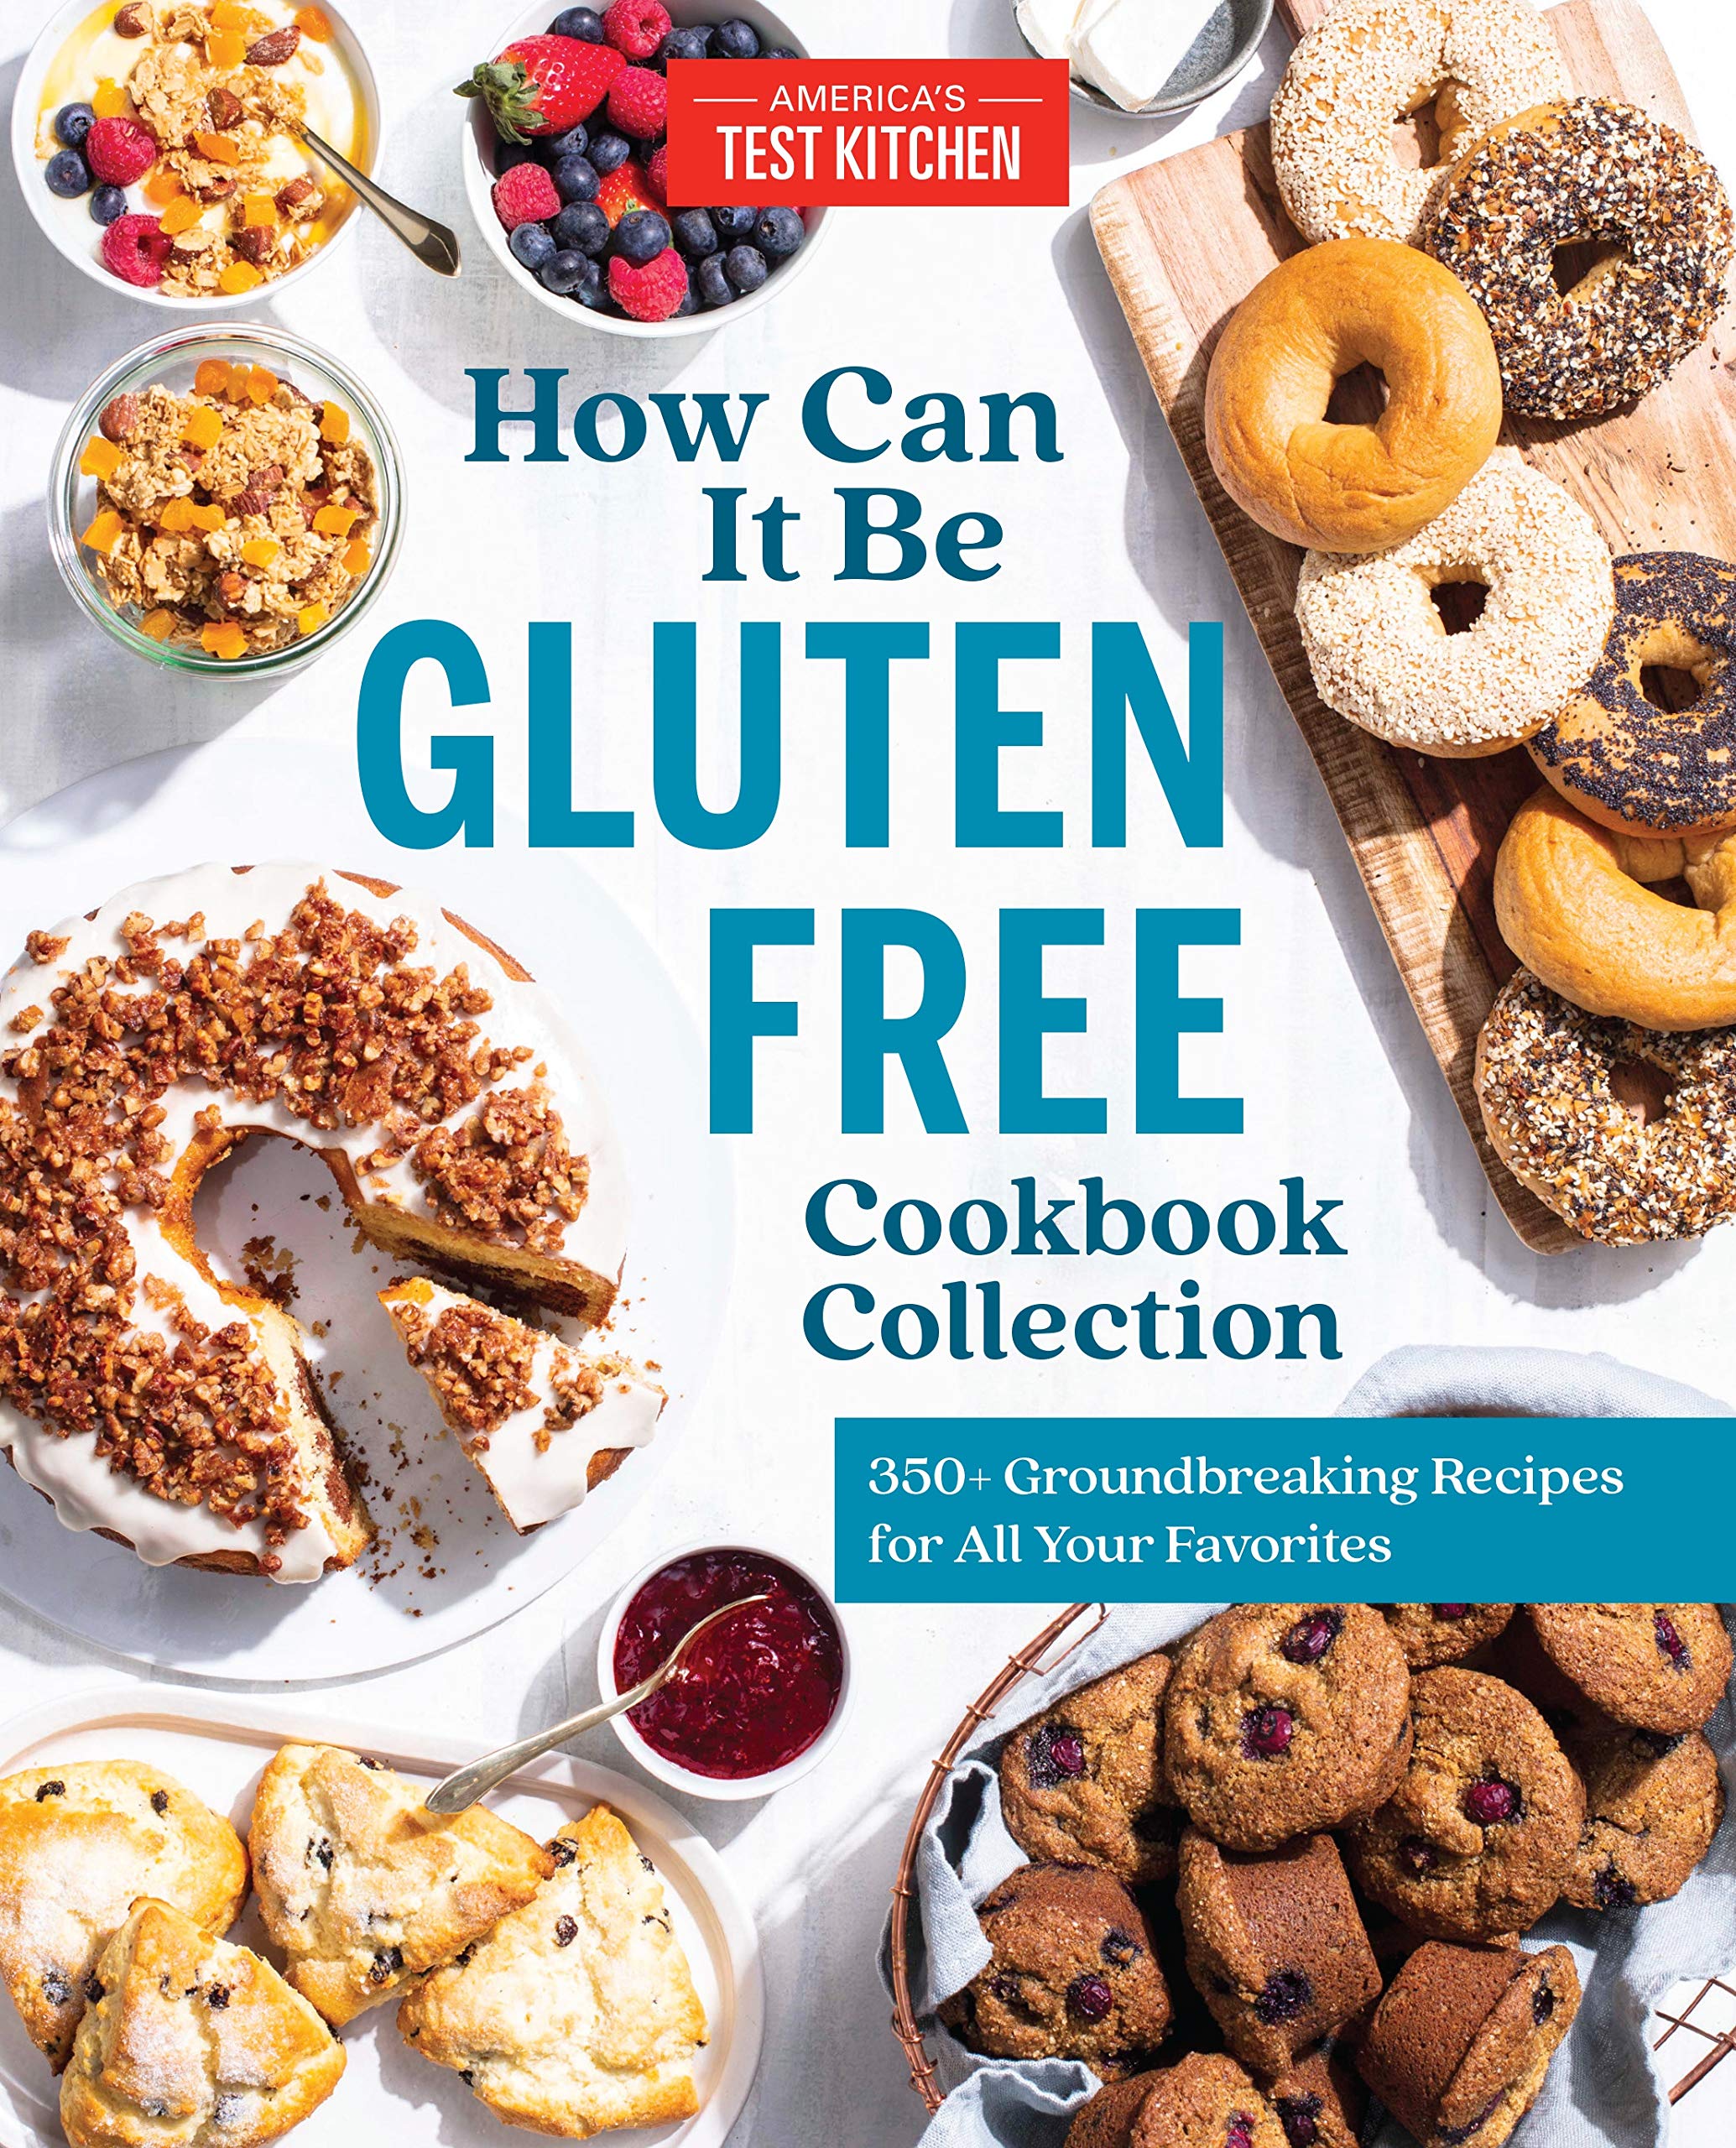 How Can It Be Gluten Free Cookbook Collection: 350+ Groundbreaking Recipes for All Your Favorites (America's Test Kitchen)